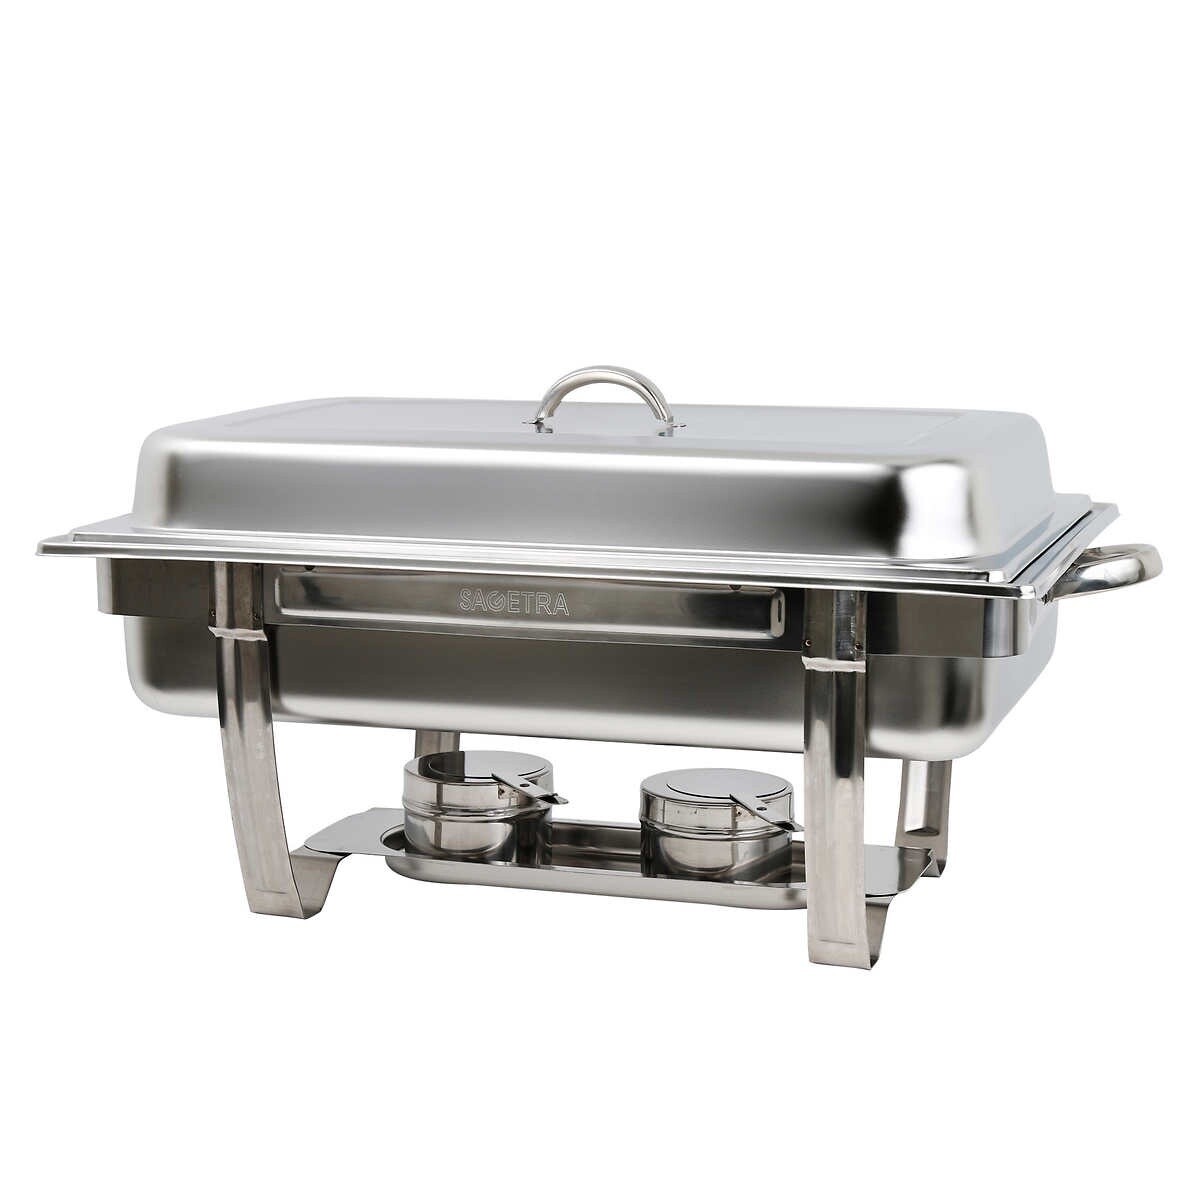 Sagetra-Full-size 18/8 Stainless-steel Chafing Dish Set